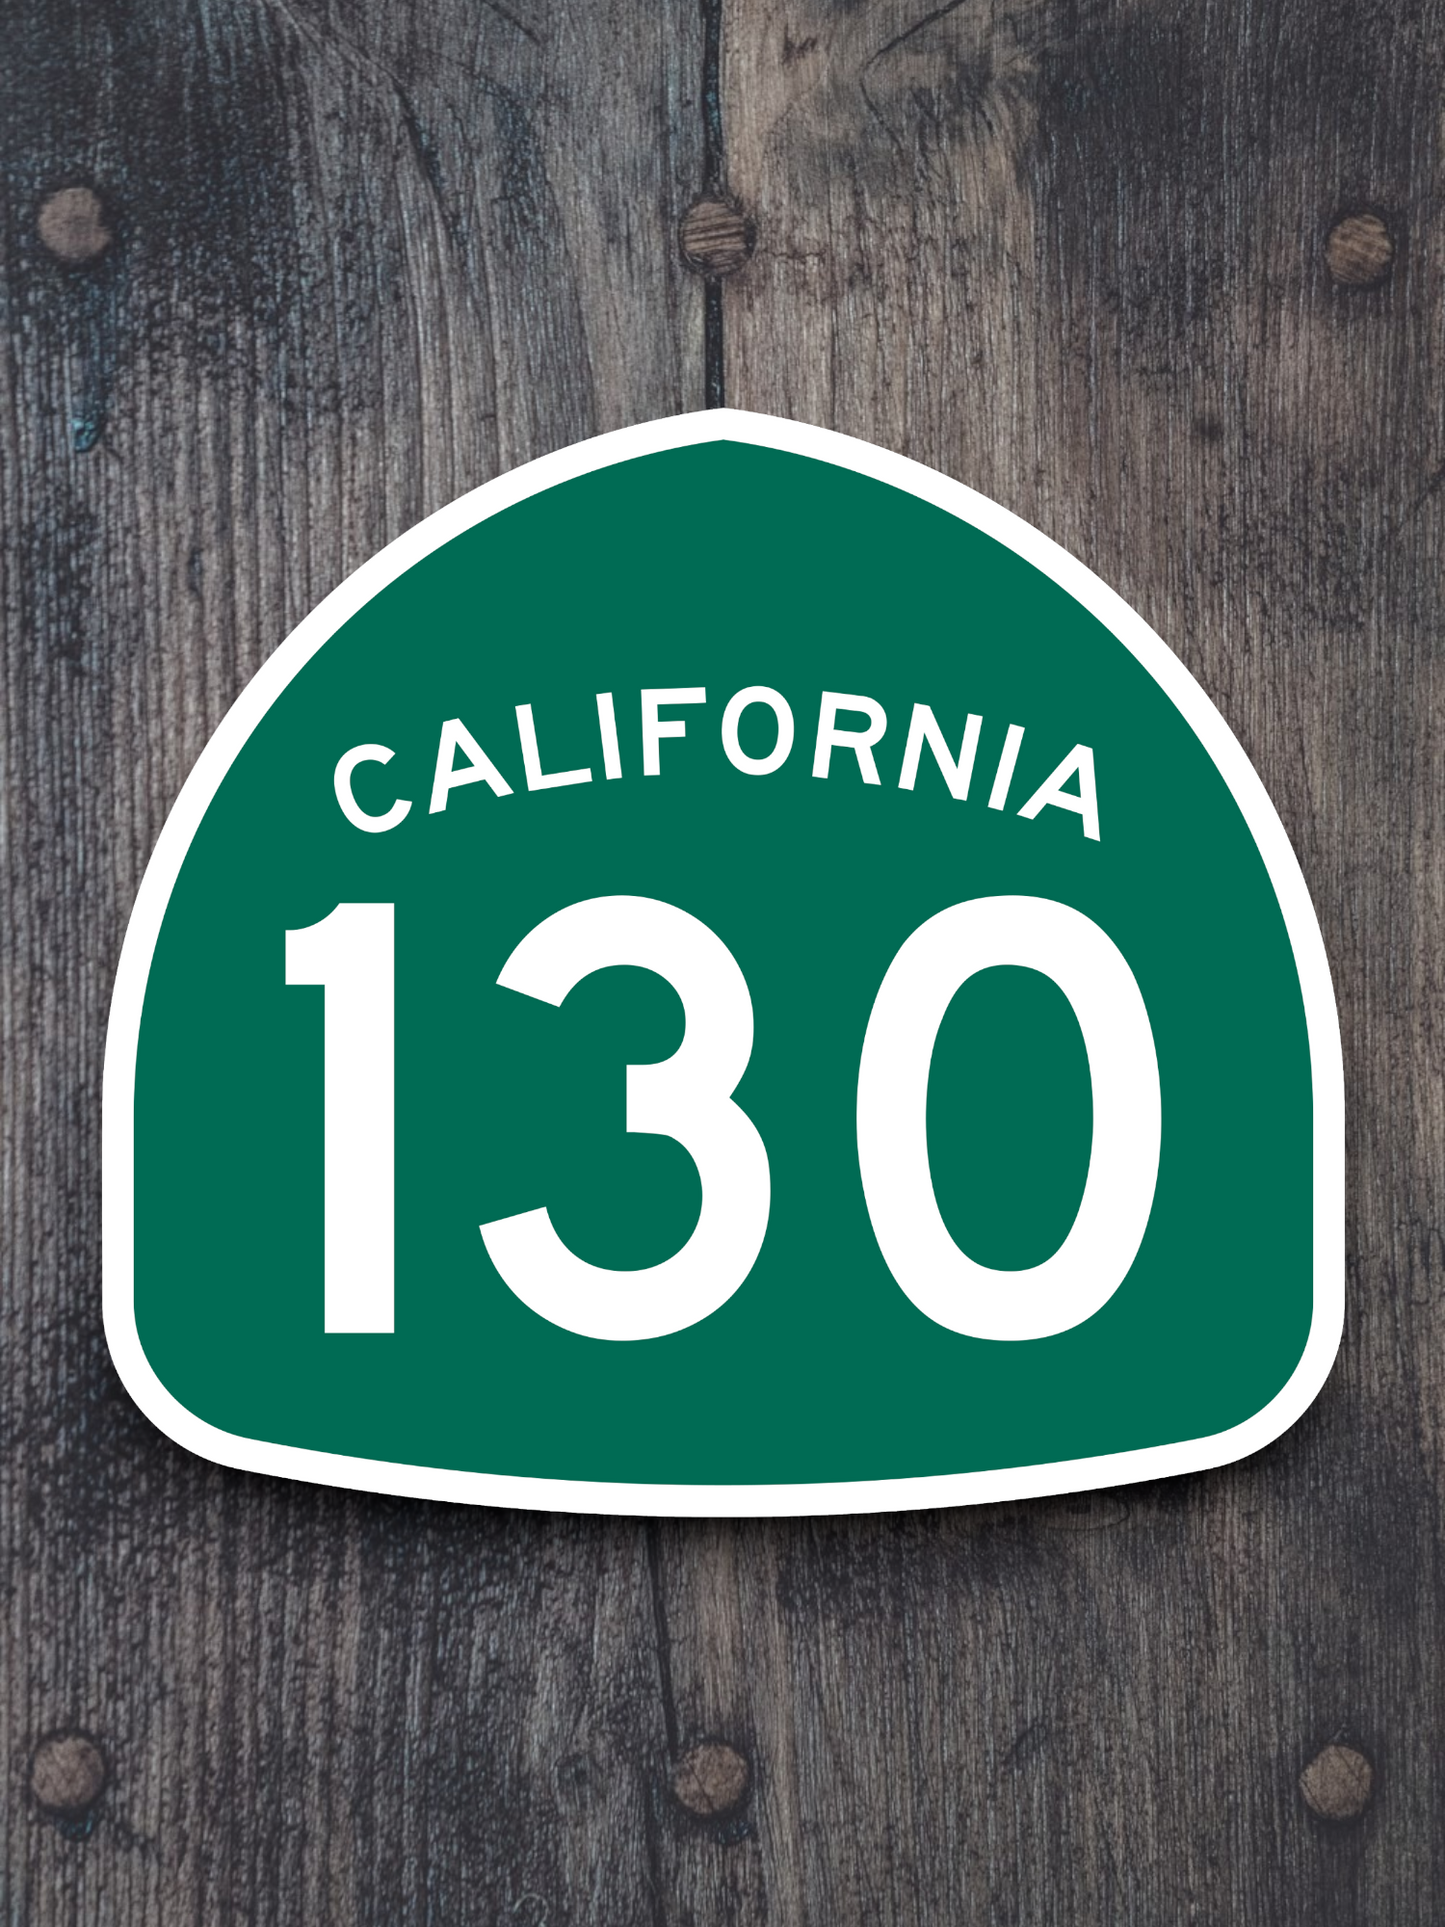 California State Route 130 Road Sign Sticker